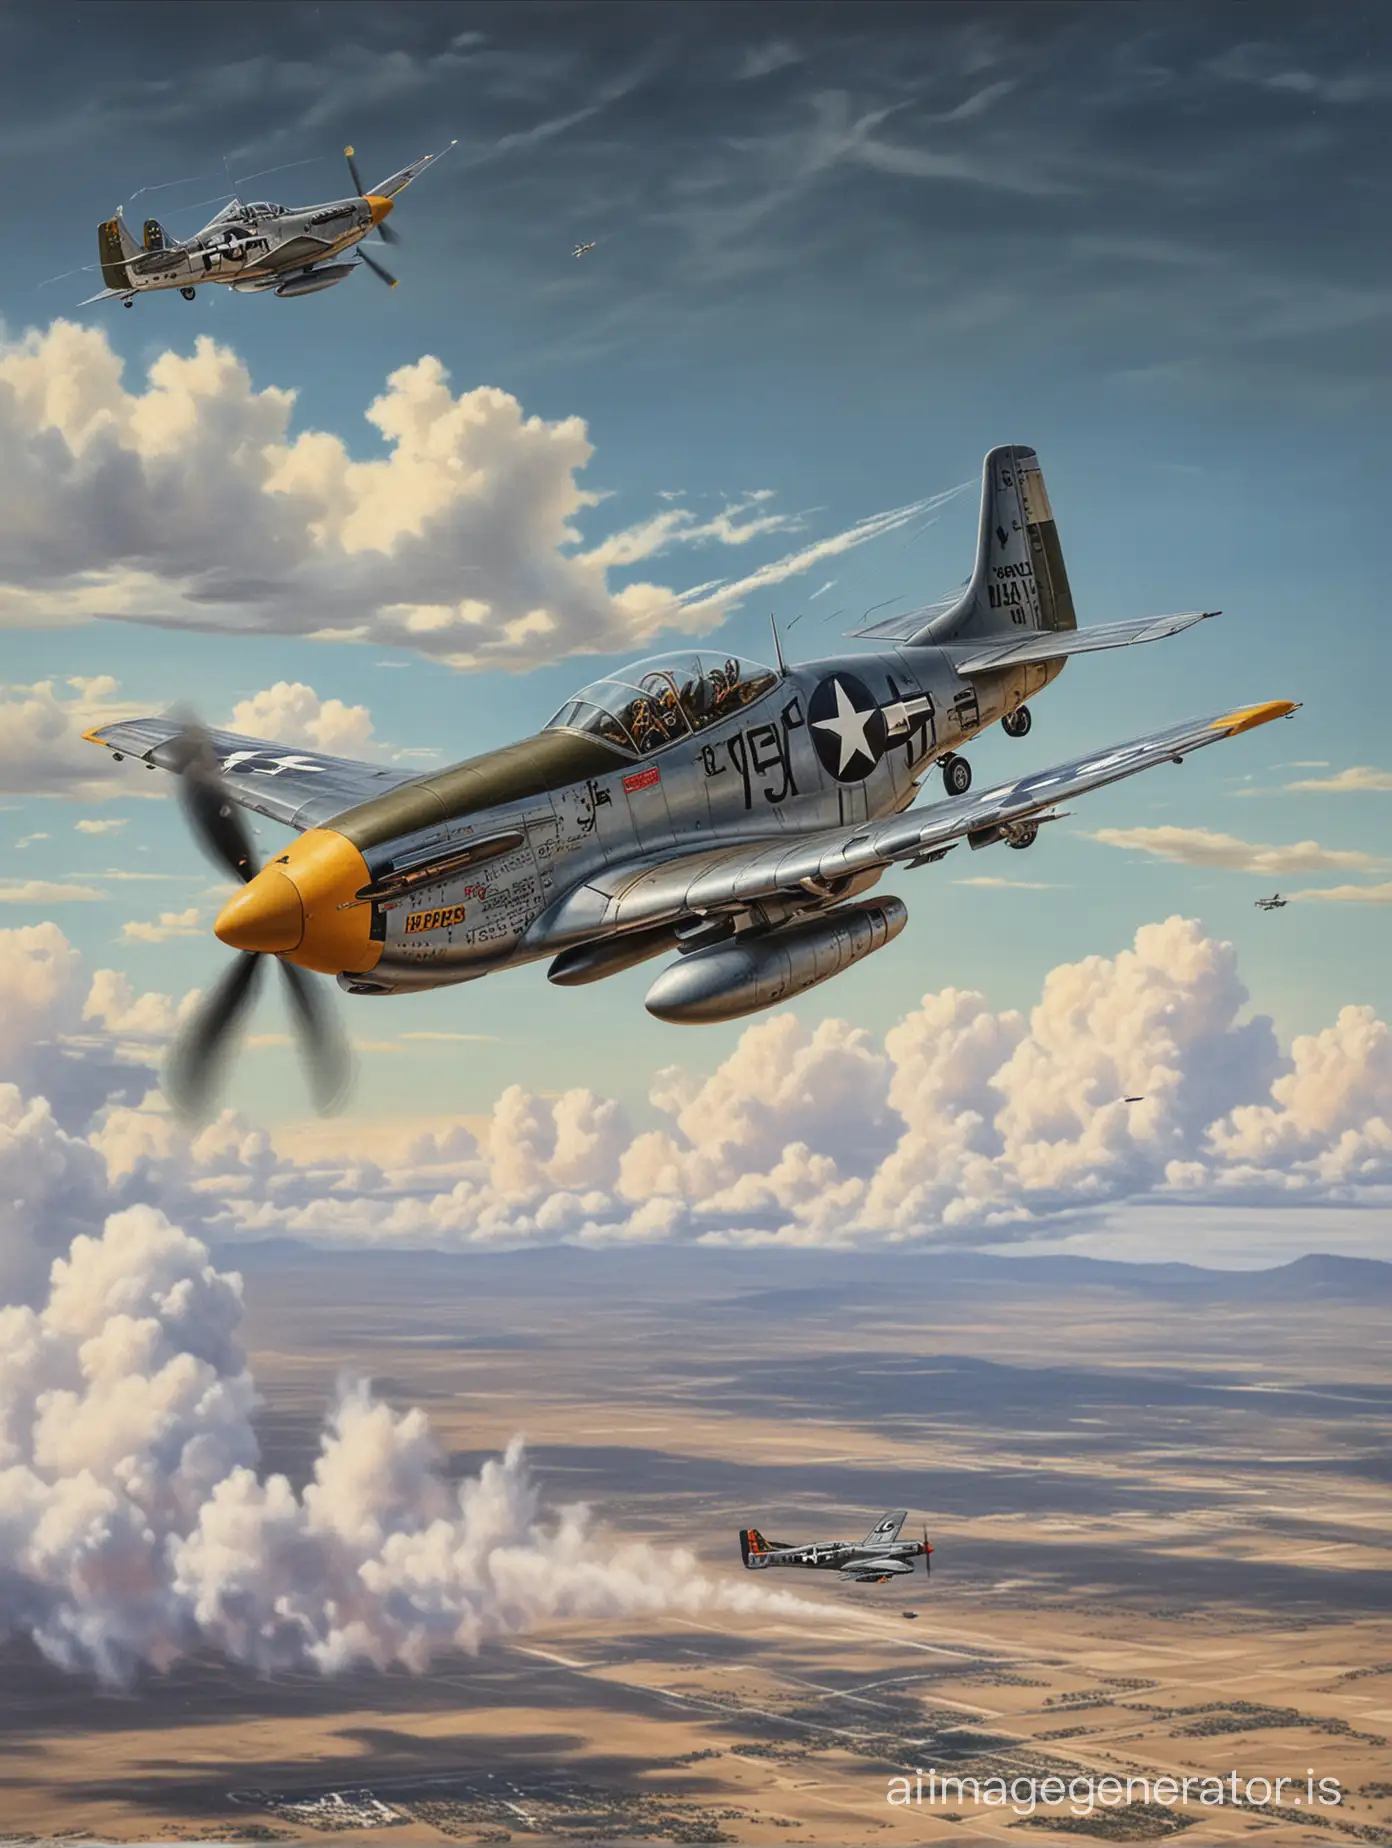 Detailed-Oil-Painting-of-P51-Mustang-Fighter-with-Pilot-Ejecting